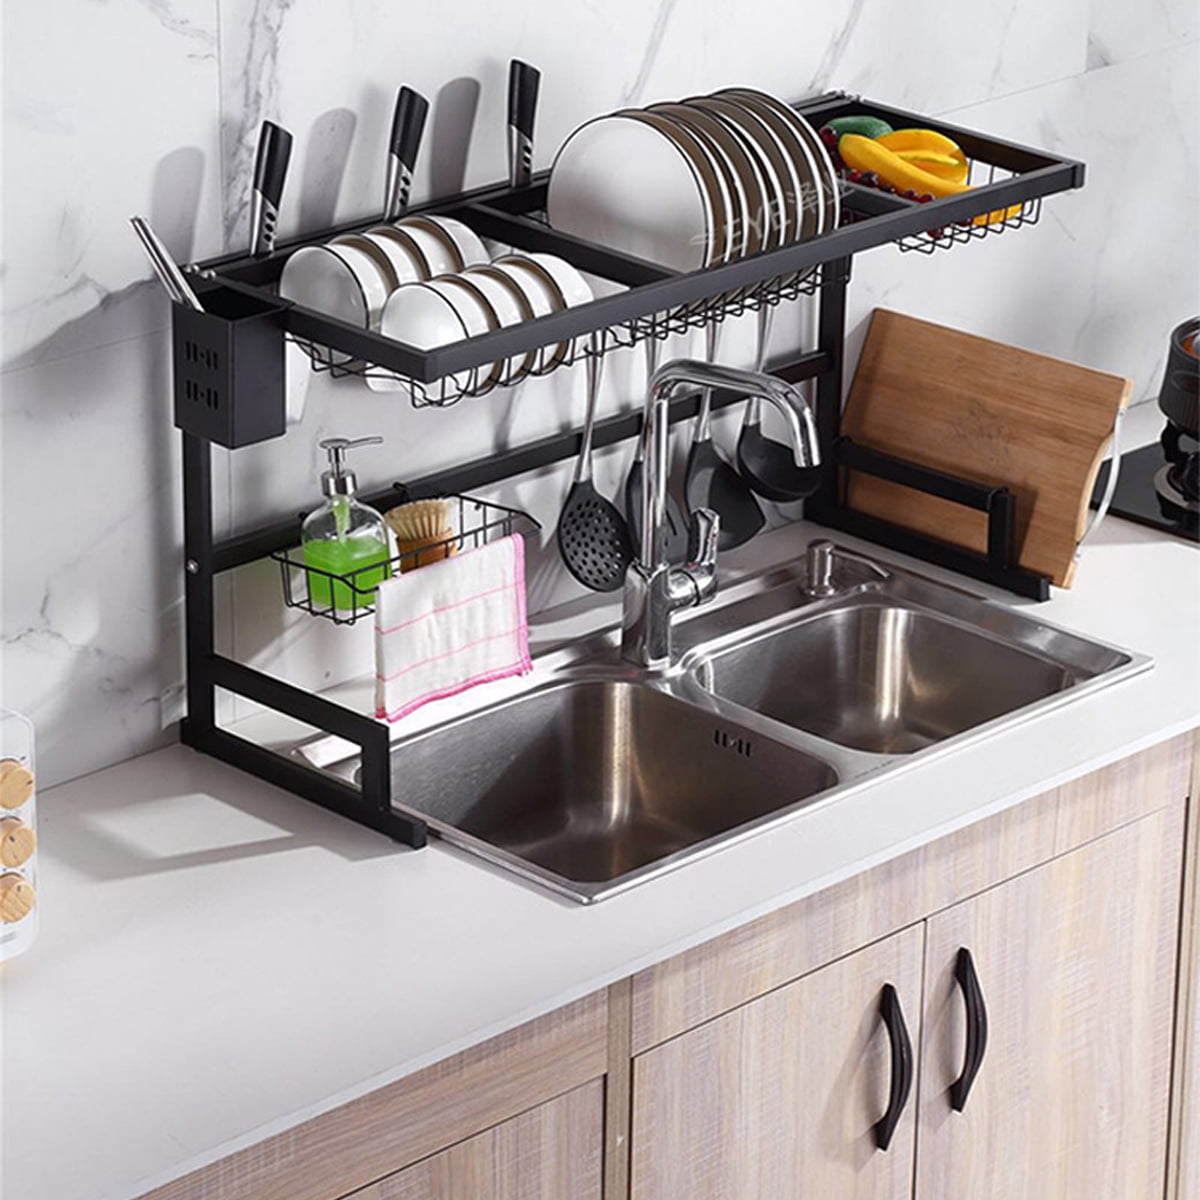 Large Capacity Over Sink Dish Drying Rack Drainer Shelf Stainless Stee 